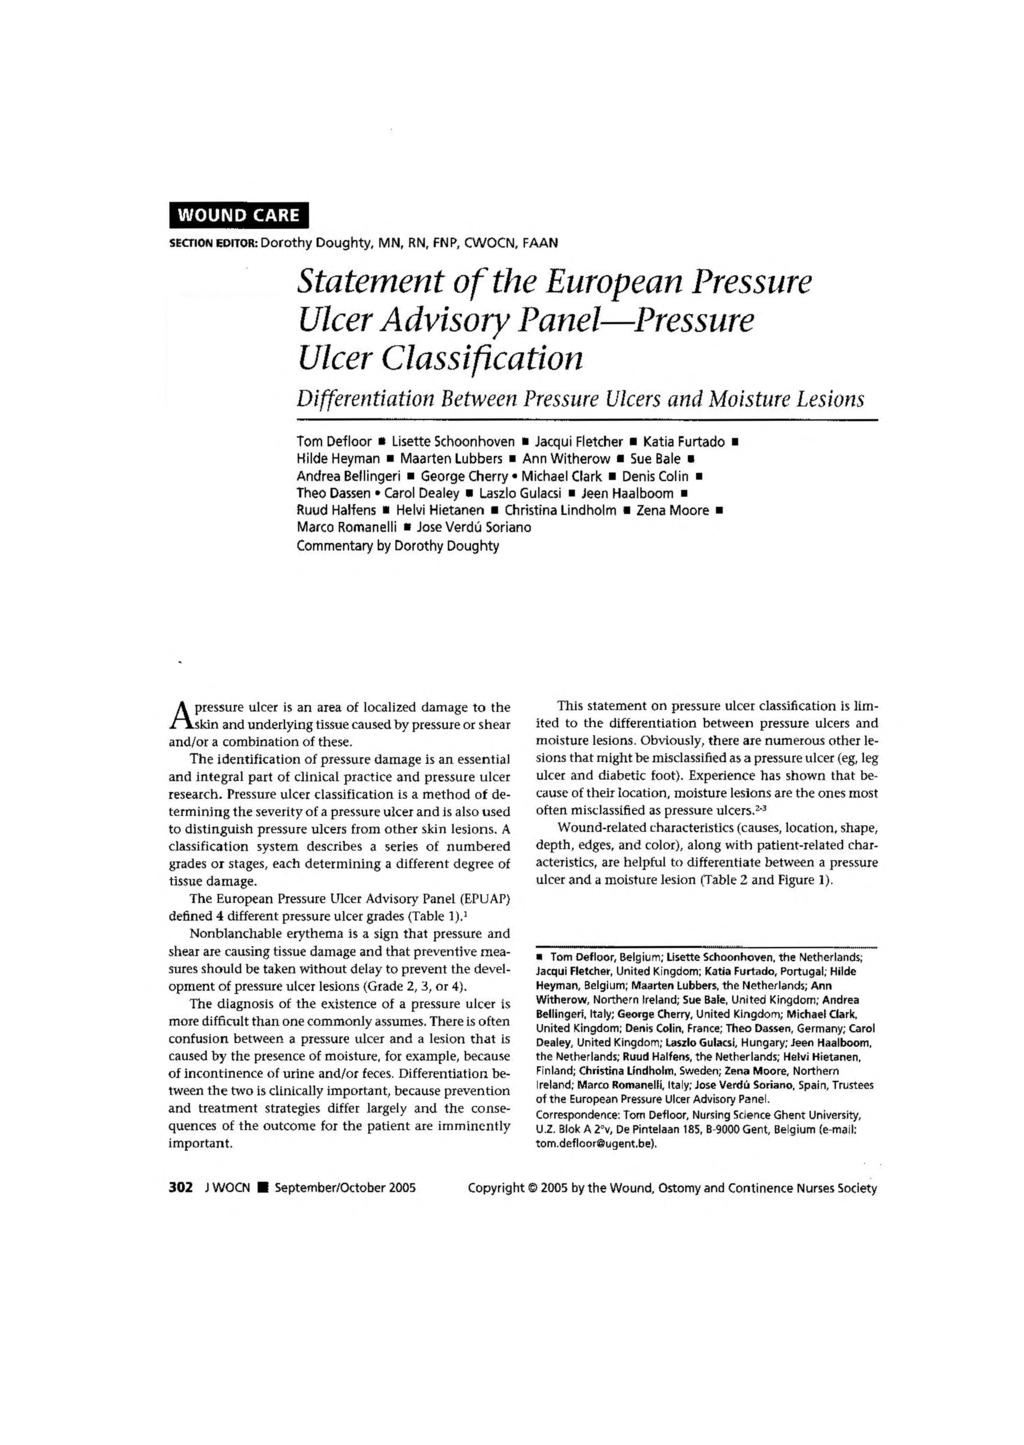 WOUND CARE SECTION EDITOR: Dorothy Doughty, MN, RN, FNP, CWOCN, FAAN Statement of the European Pressure Ulcer Advisory Panel Pressure Ulcer Classification Differentiation Between Pressure Ulcers and